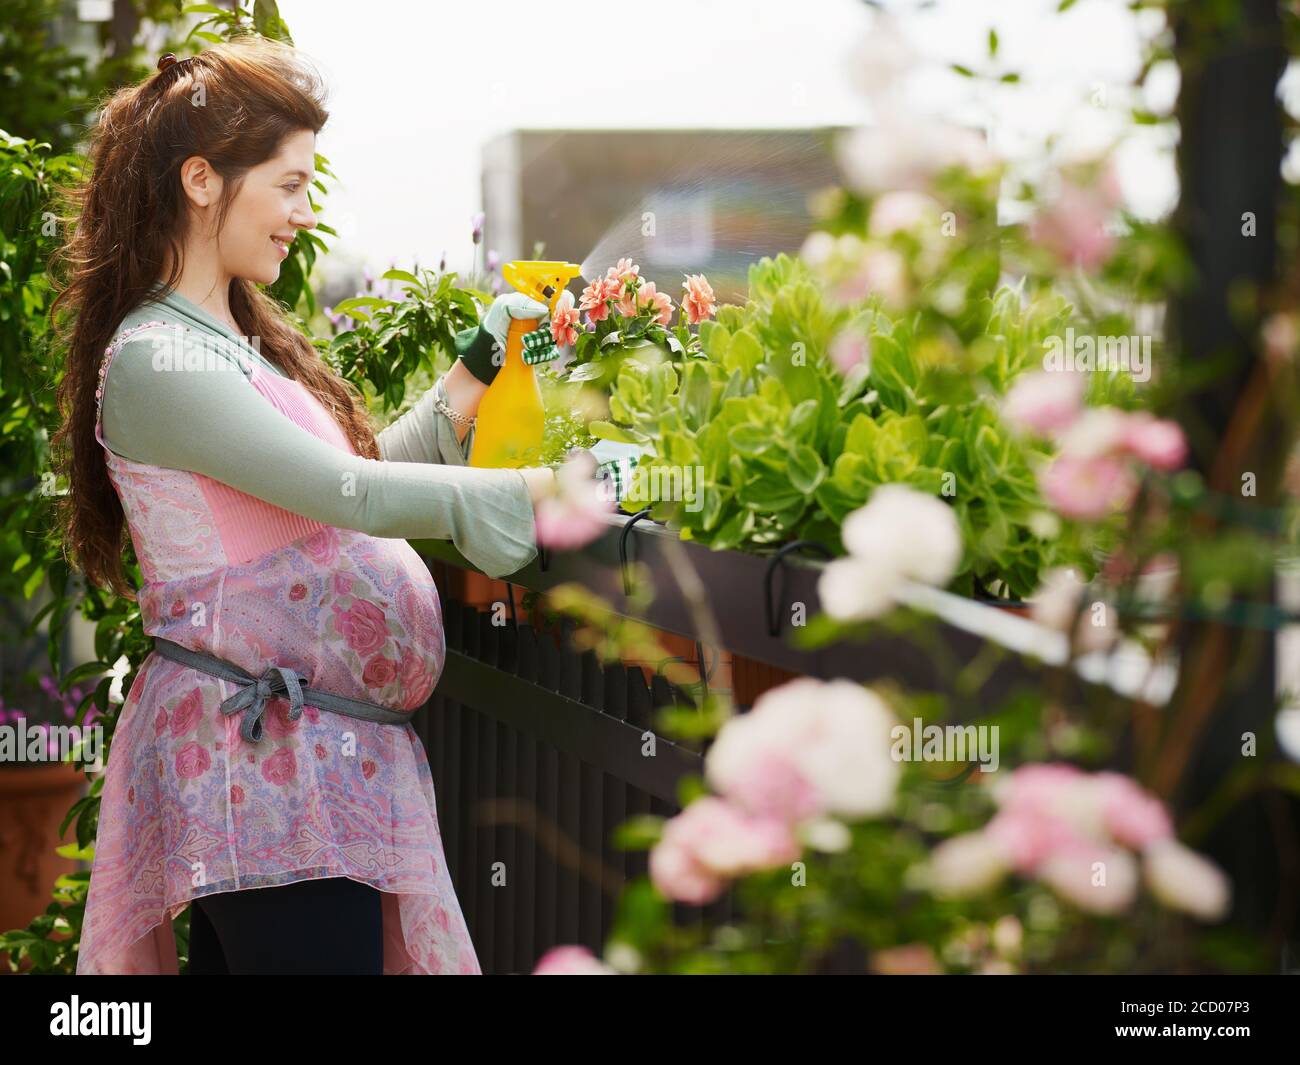 Young Pregnant Woman Spraying Water On Plants And Flowers Stock Photo